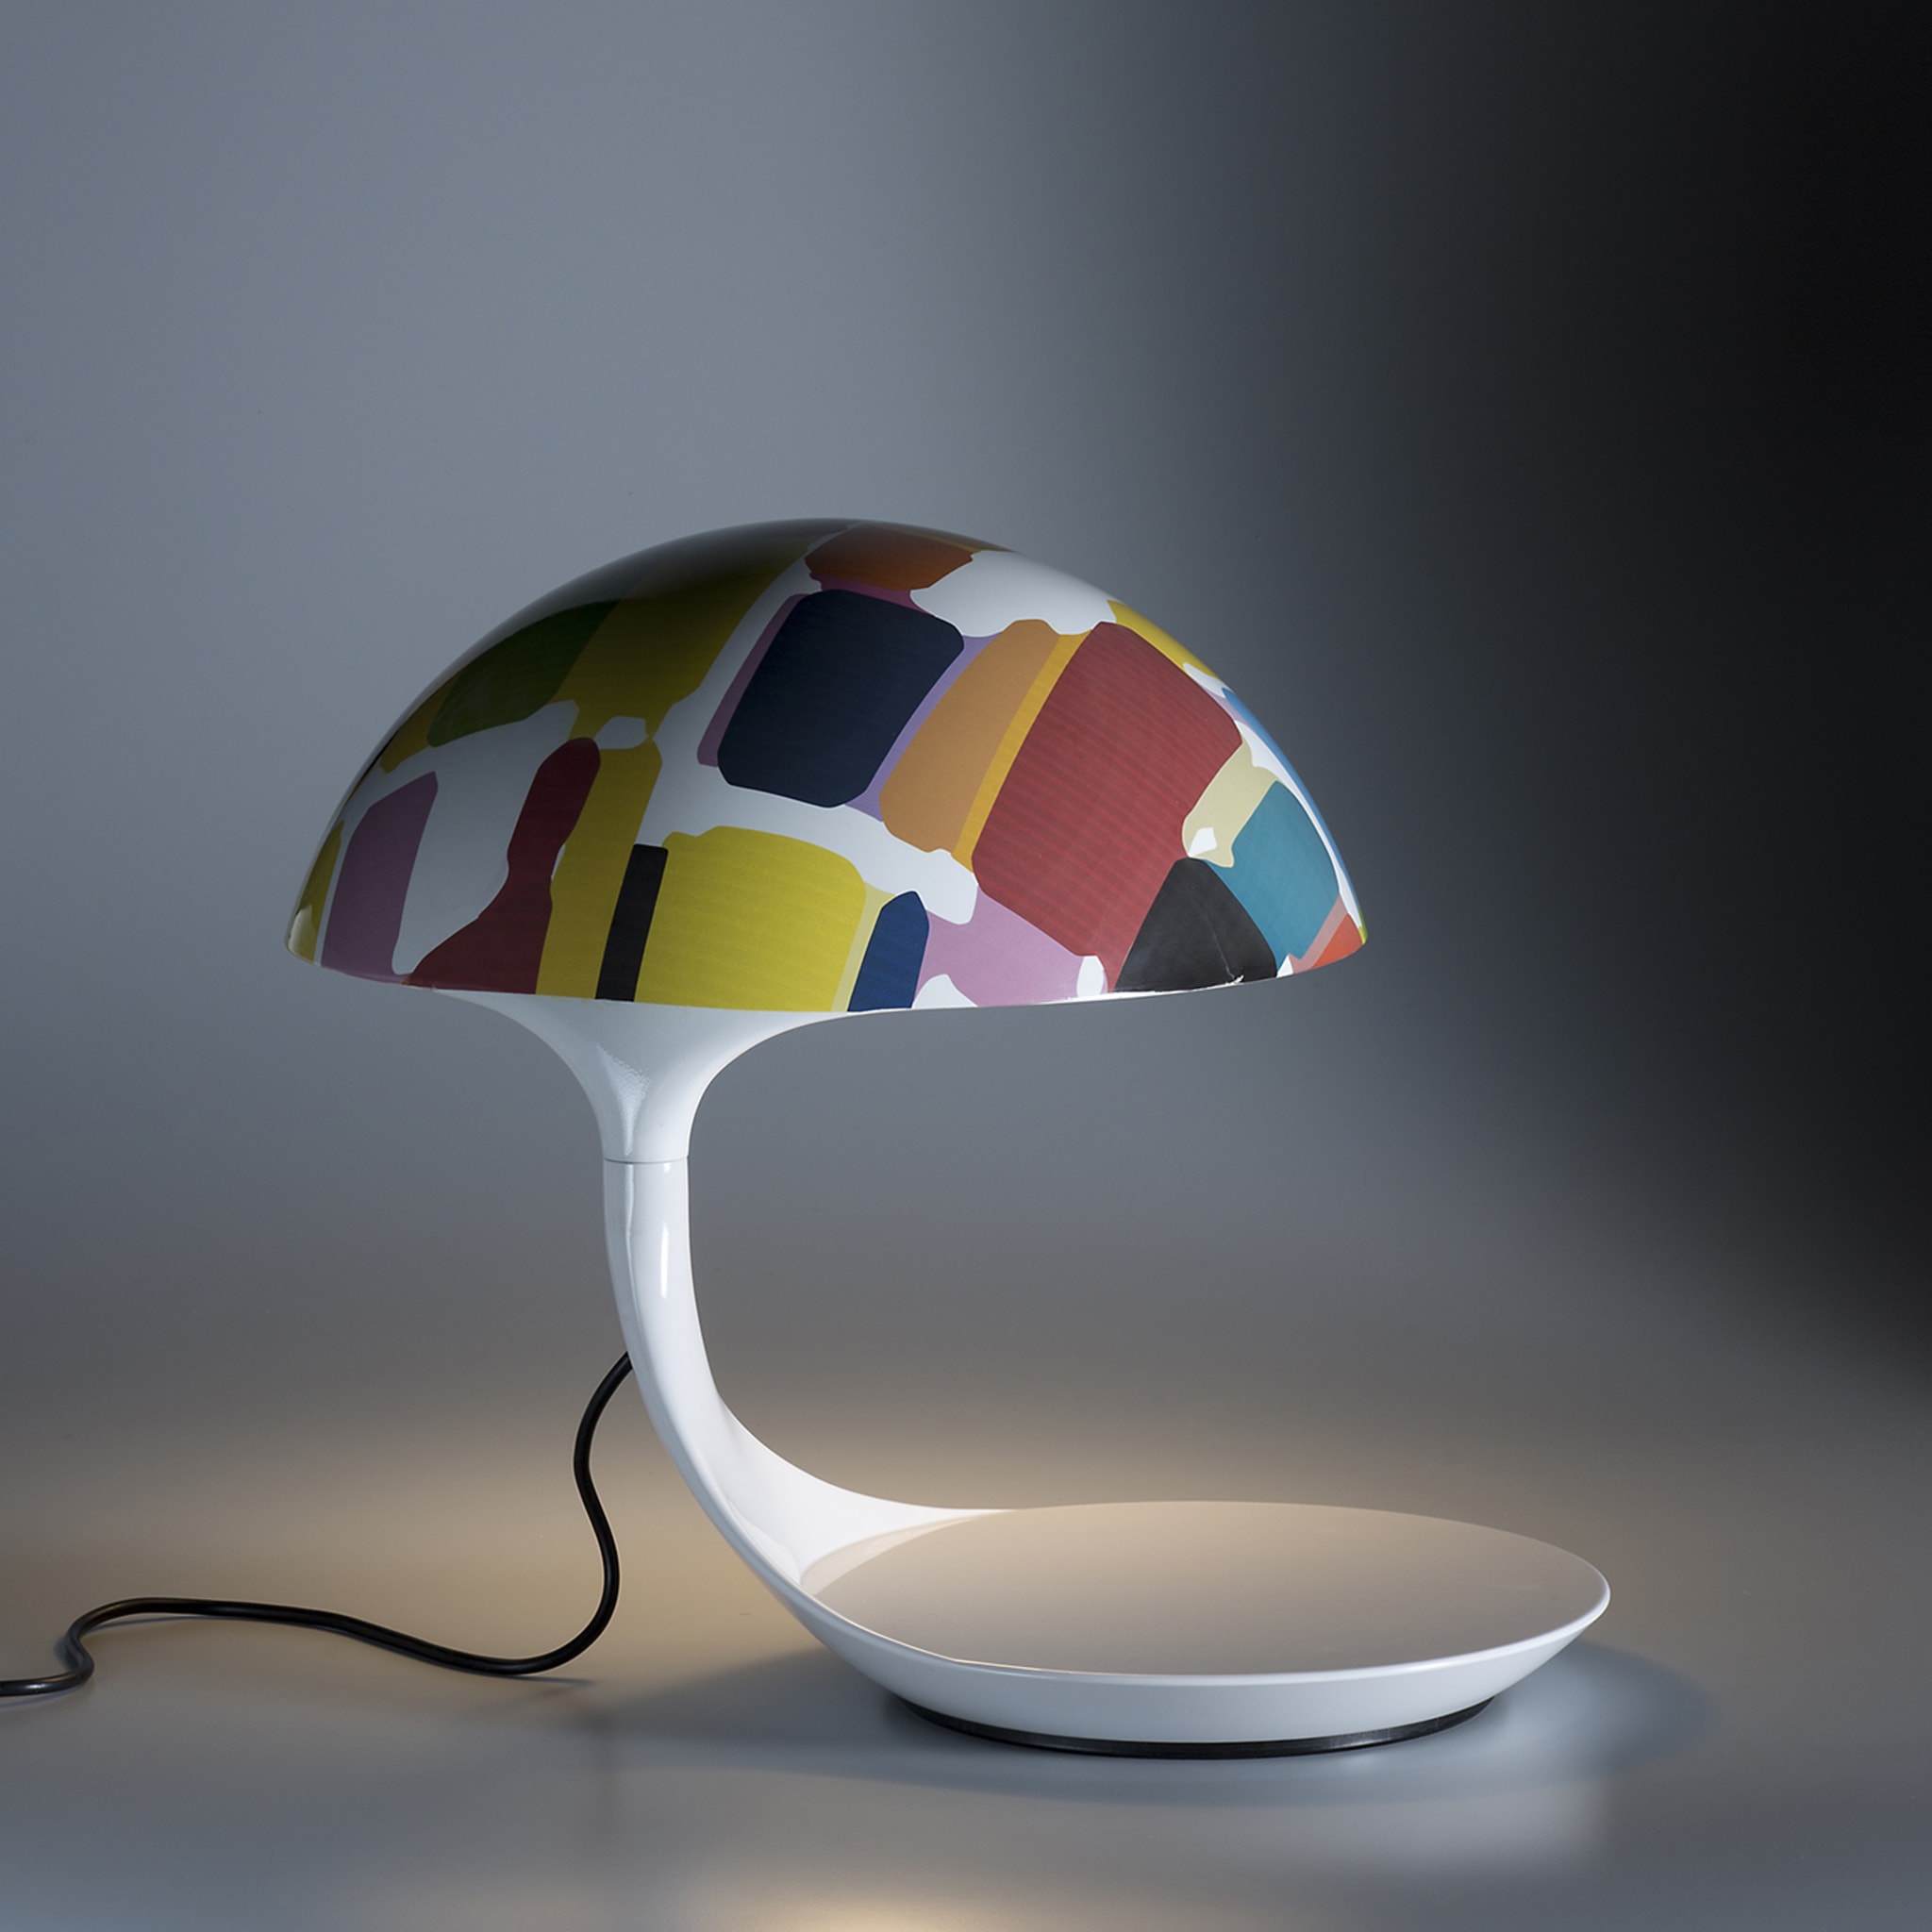 Cobra Texture Polychrome Table Lamp by Michel Bouquillon - Alternative view 1